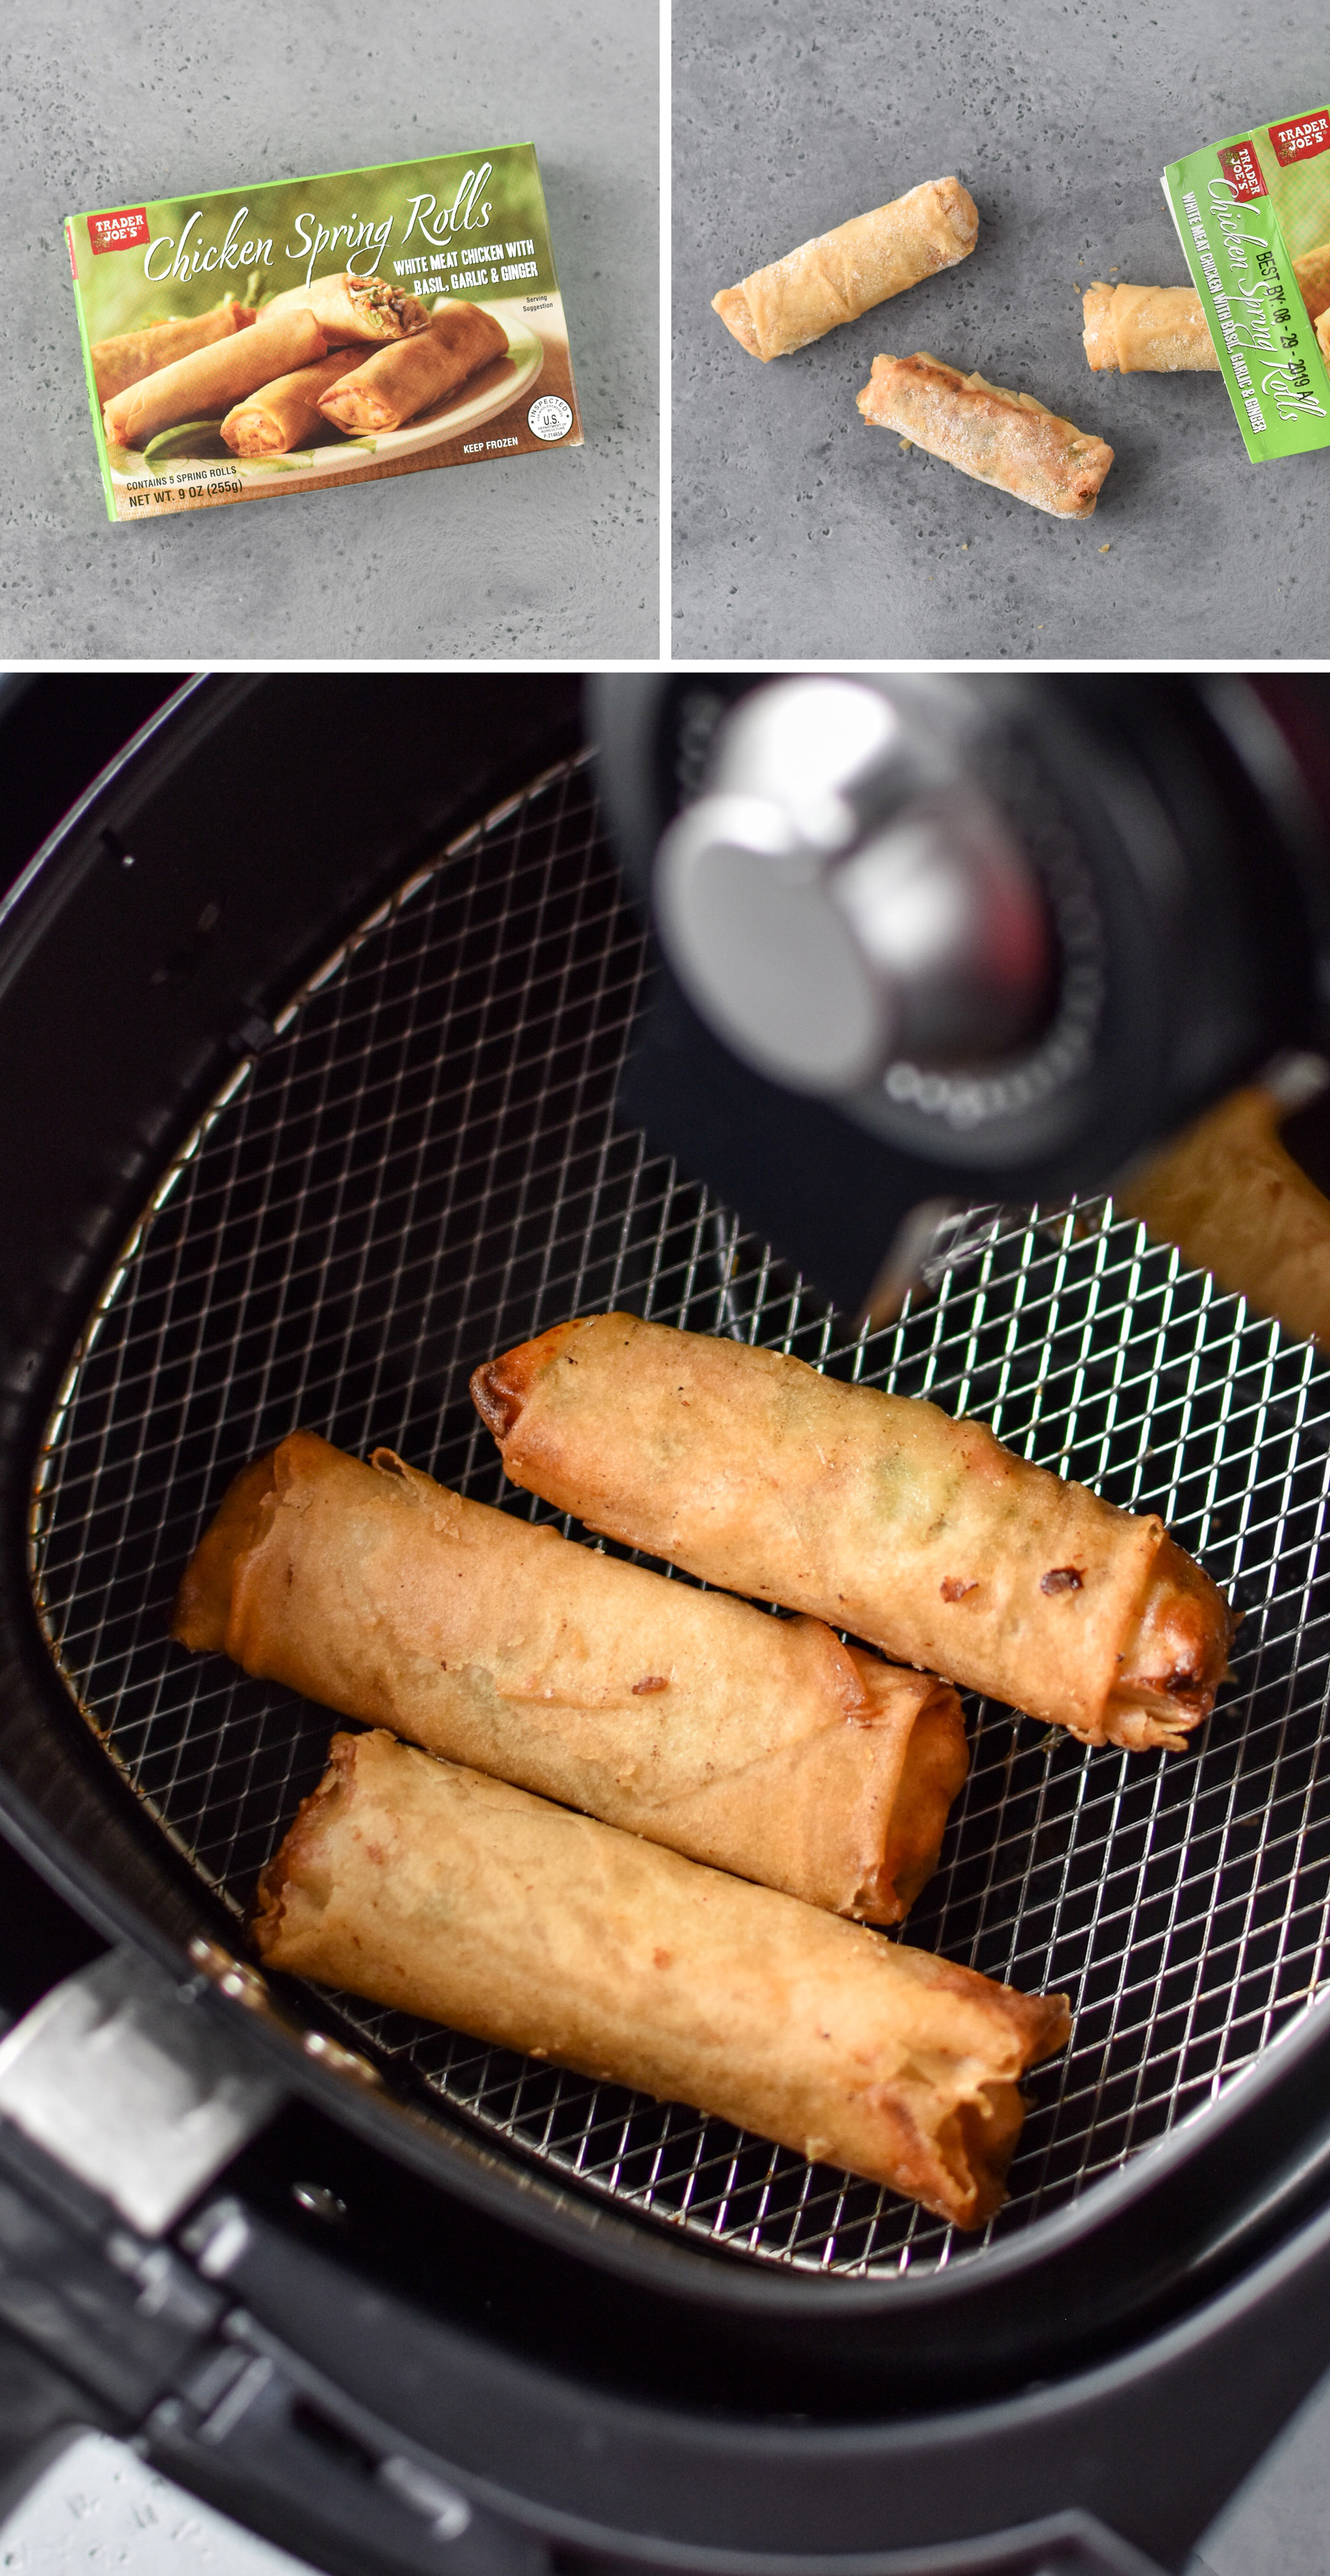 chicken spring rolls from trader joe's made in the air fryer